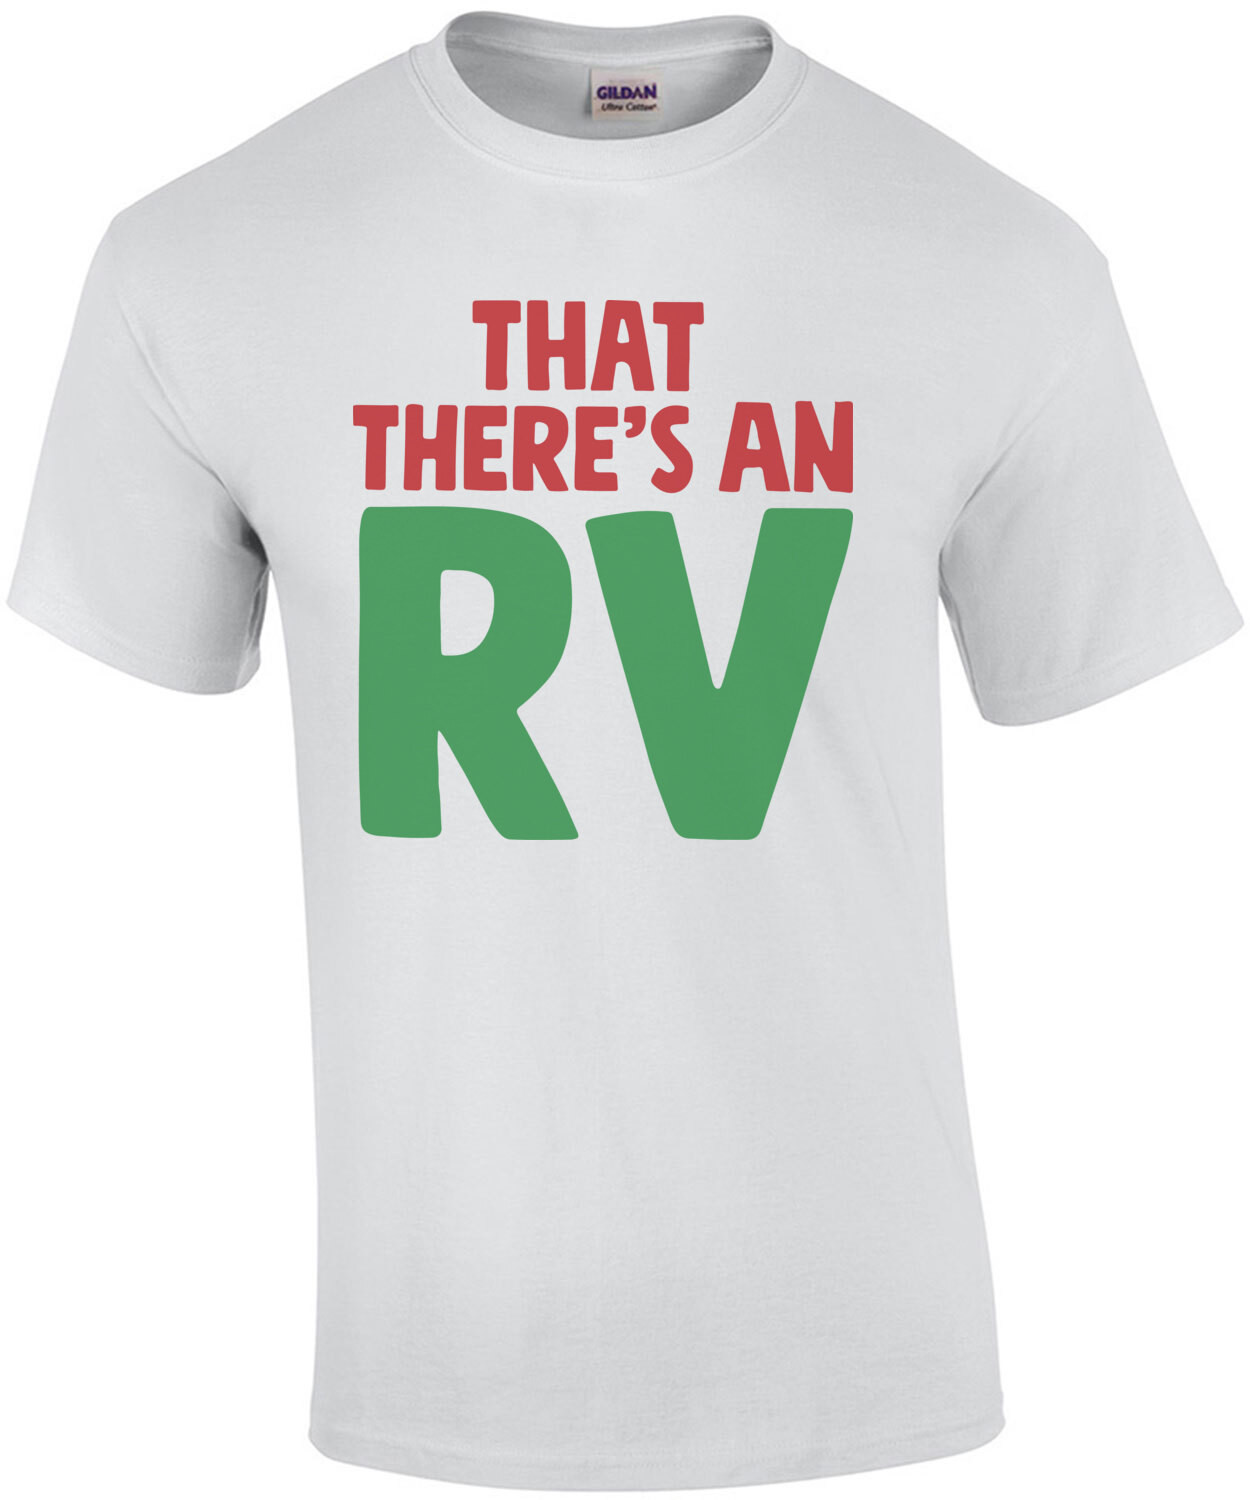 That There's an RV - Christmas Vacation T-Shirt 